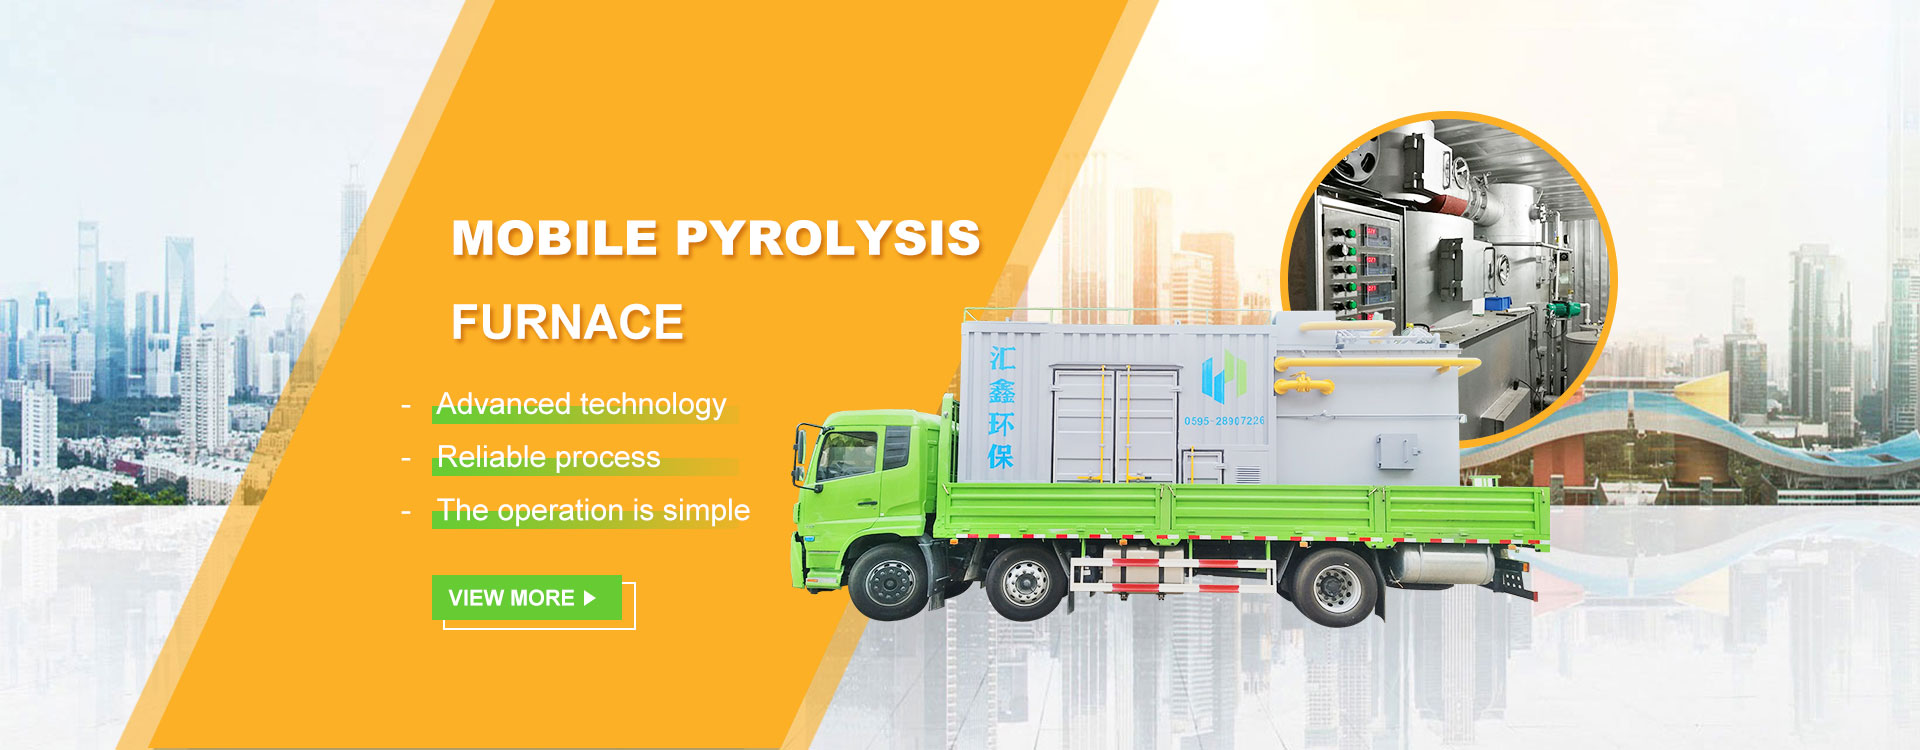 Mobile Pyrolysis Furnace Suppliers